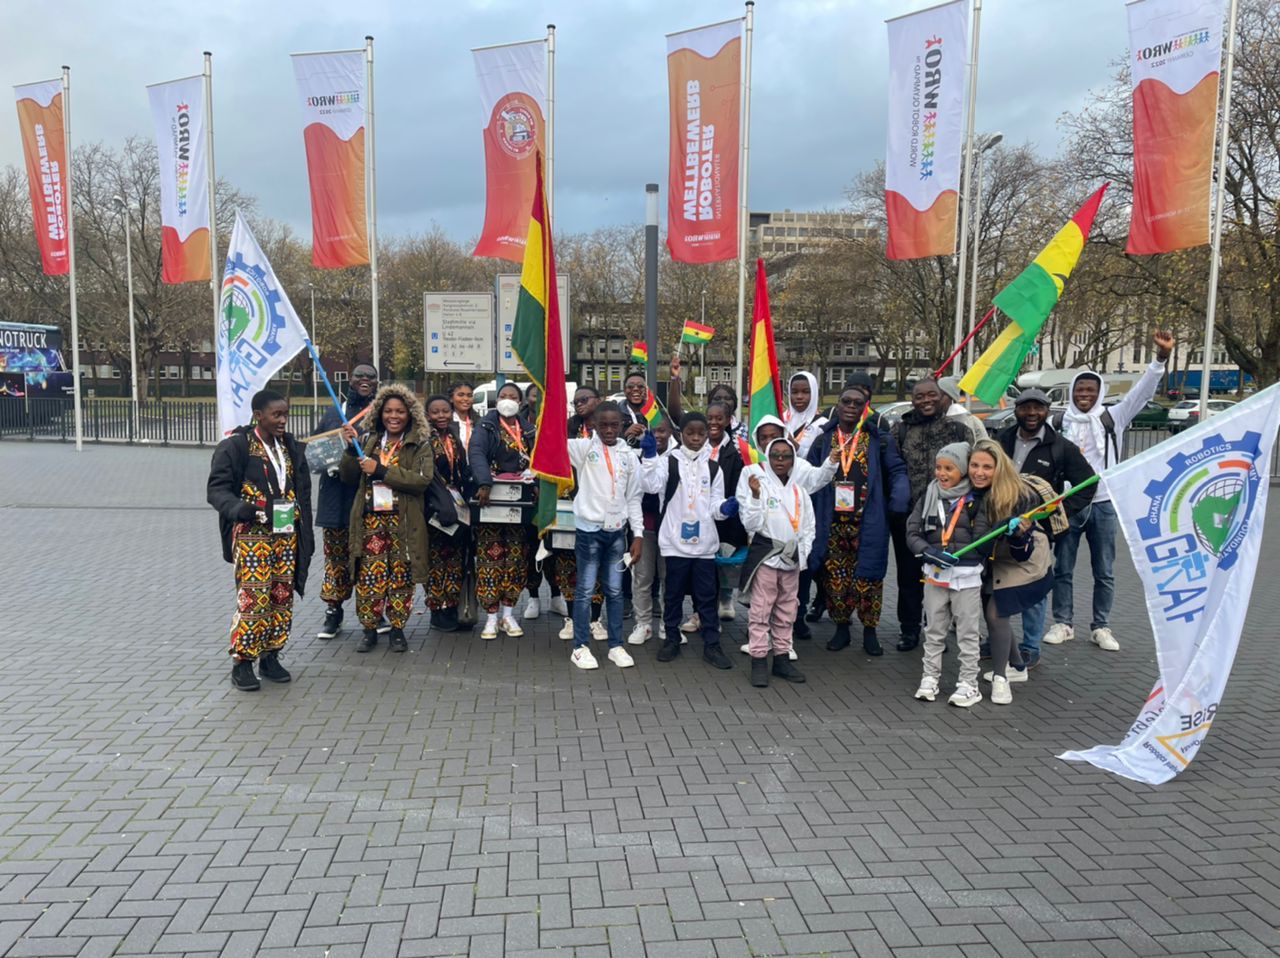 Ghana sends four teams to World Robot Olympiad in Germany